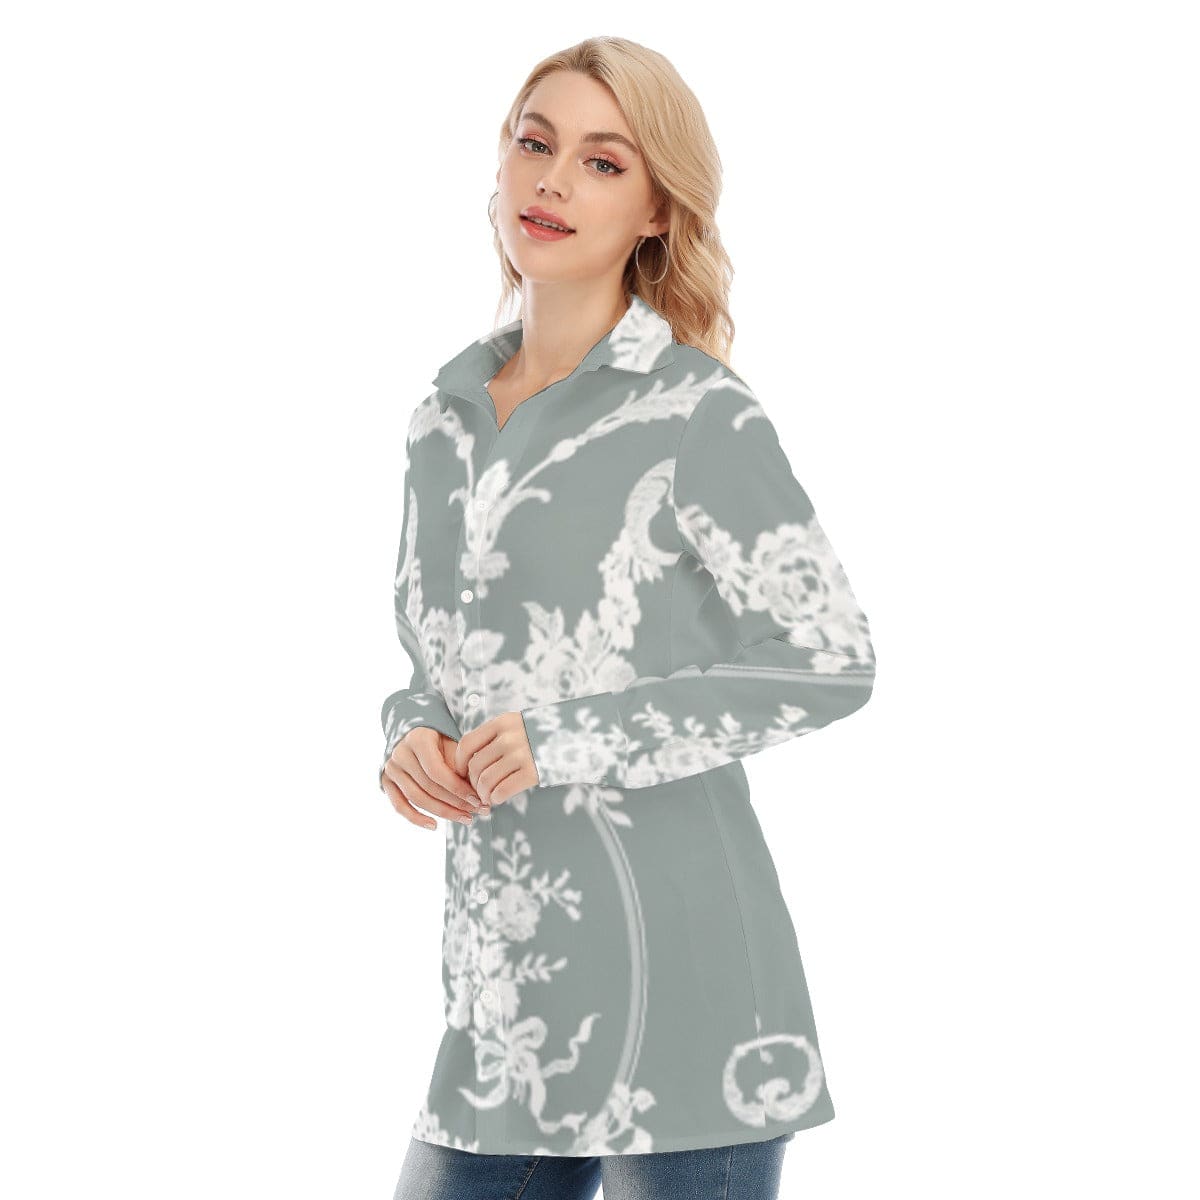 3R9FL All-Over Print Women's Long Shirt |115GSM 98% Cotton and 2% spandex